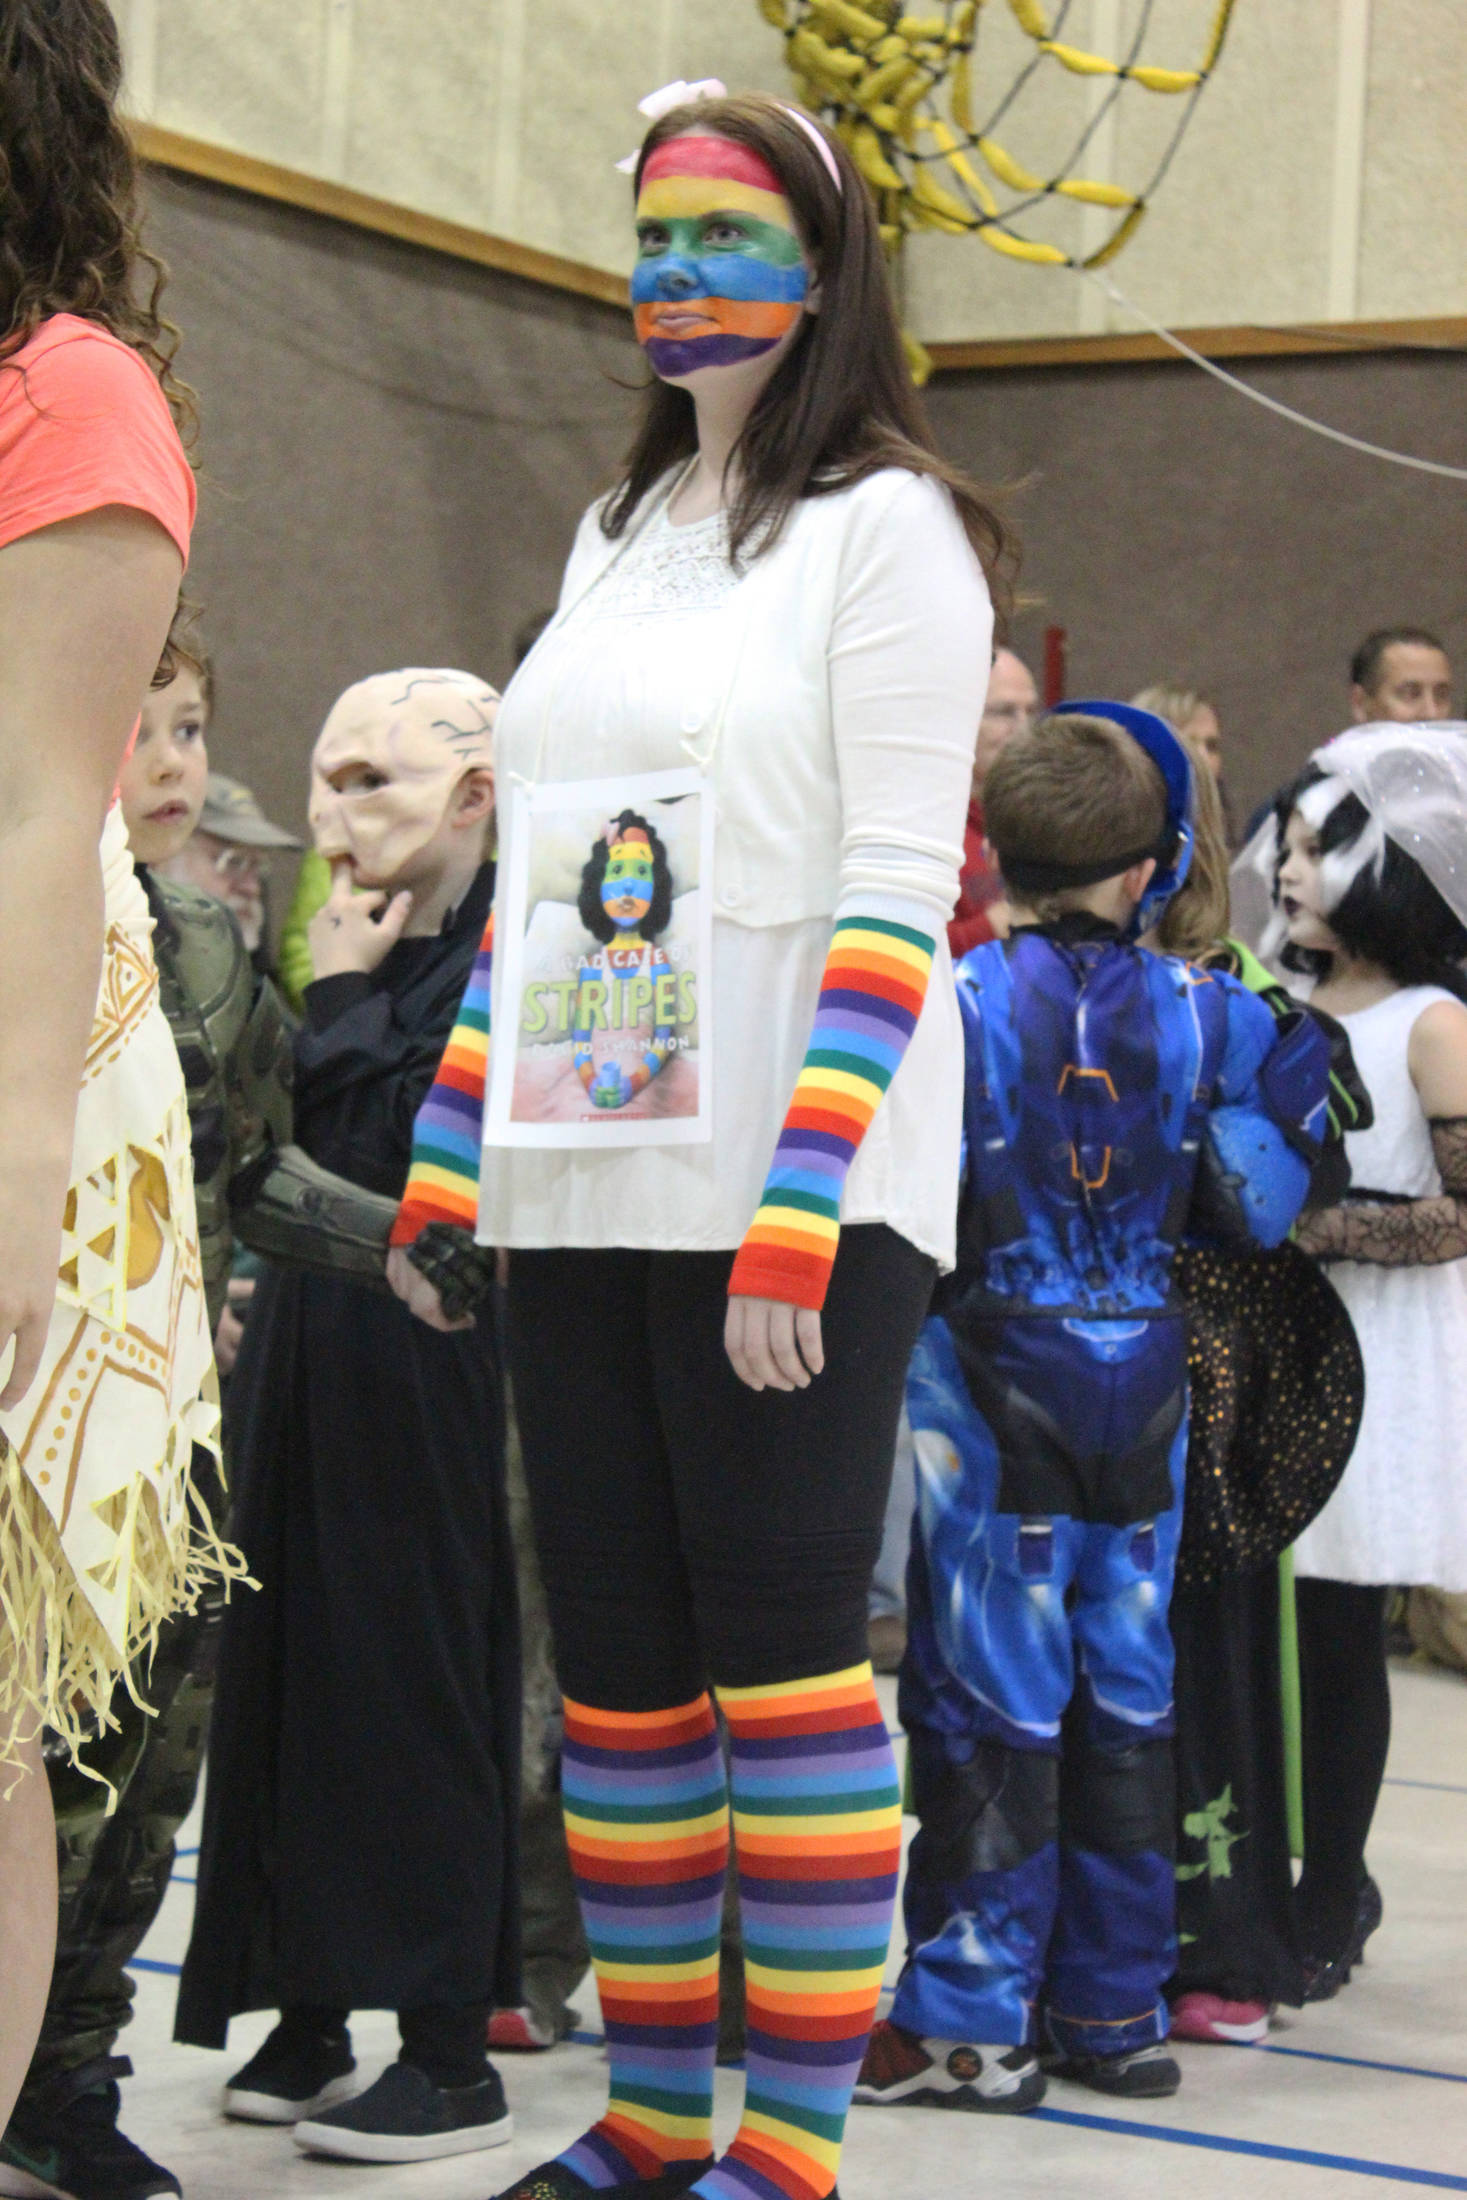 Jennifer Olson, a teacher a Paul Banks Elementary School, walks in the school’s Halloween costume parade as “A Bad Case of the Stripes” on Tuesday, Oct. 31, 2017 at the school in Homer, Alaska. (Photo by Megan Pacer/Homer News)